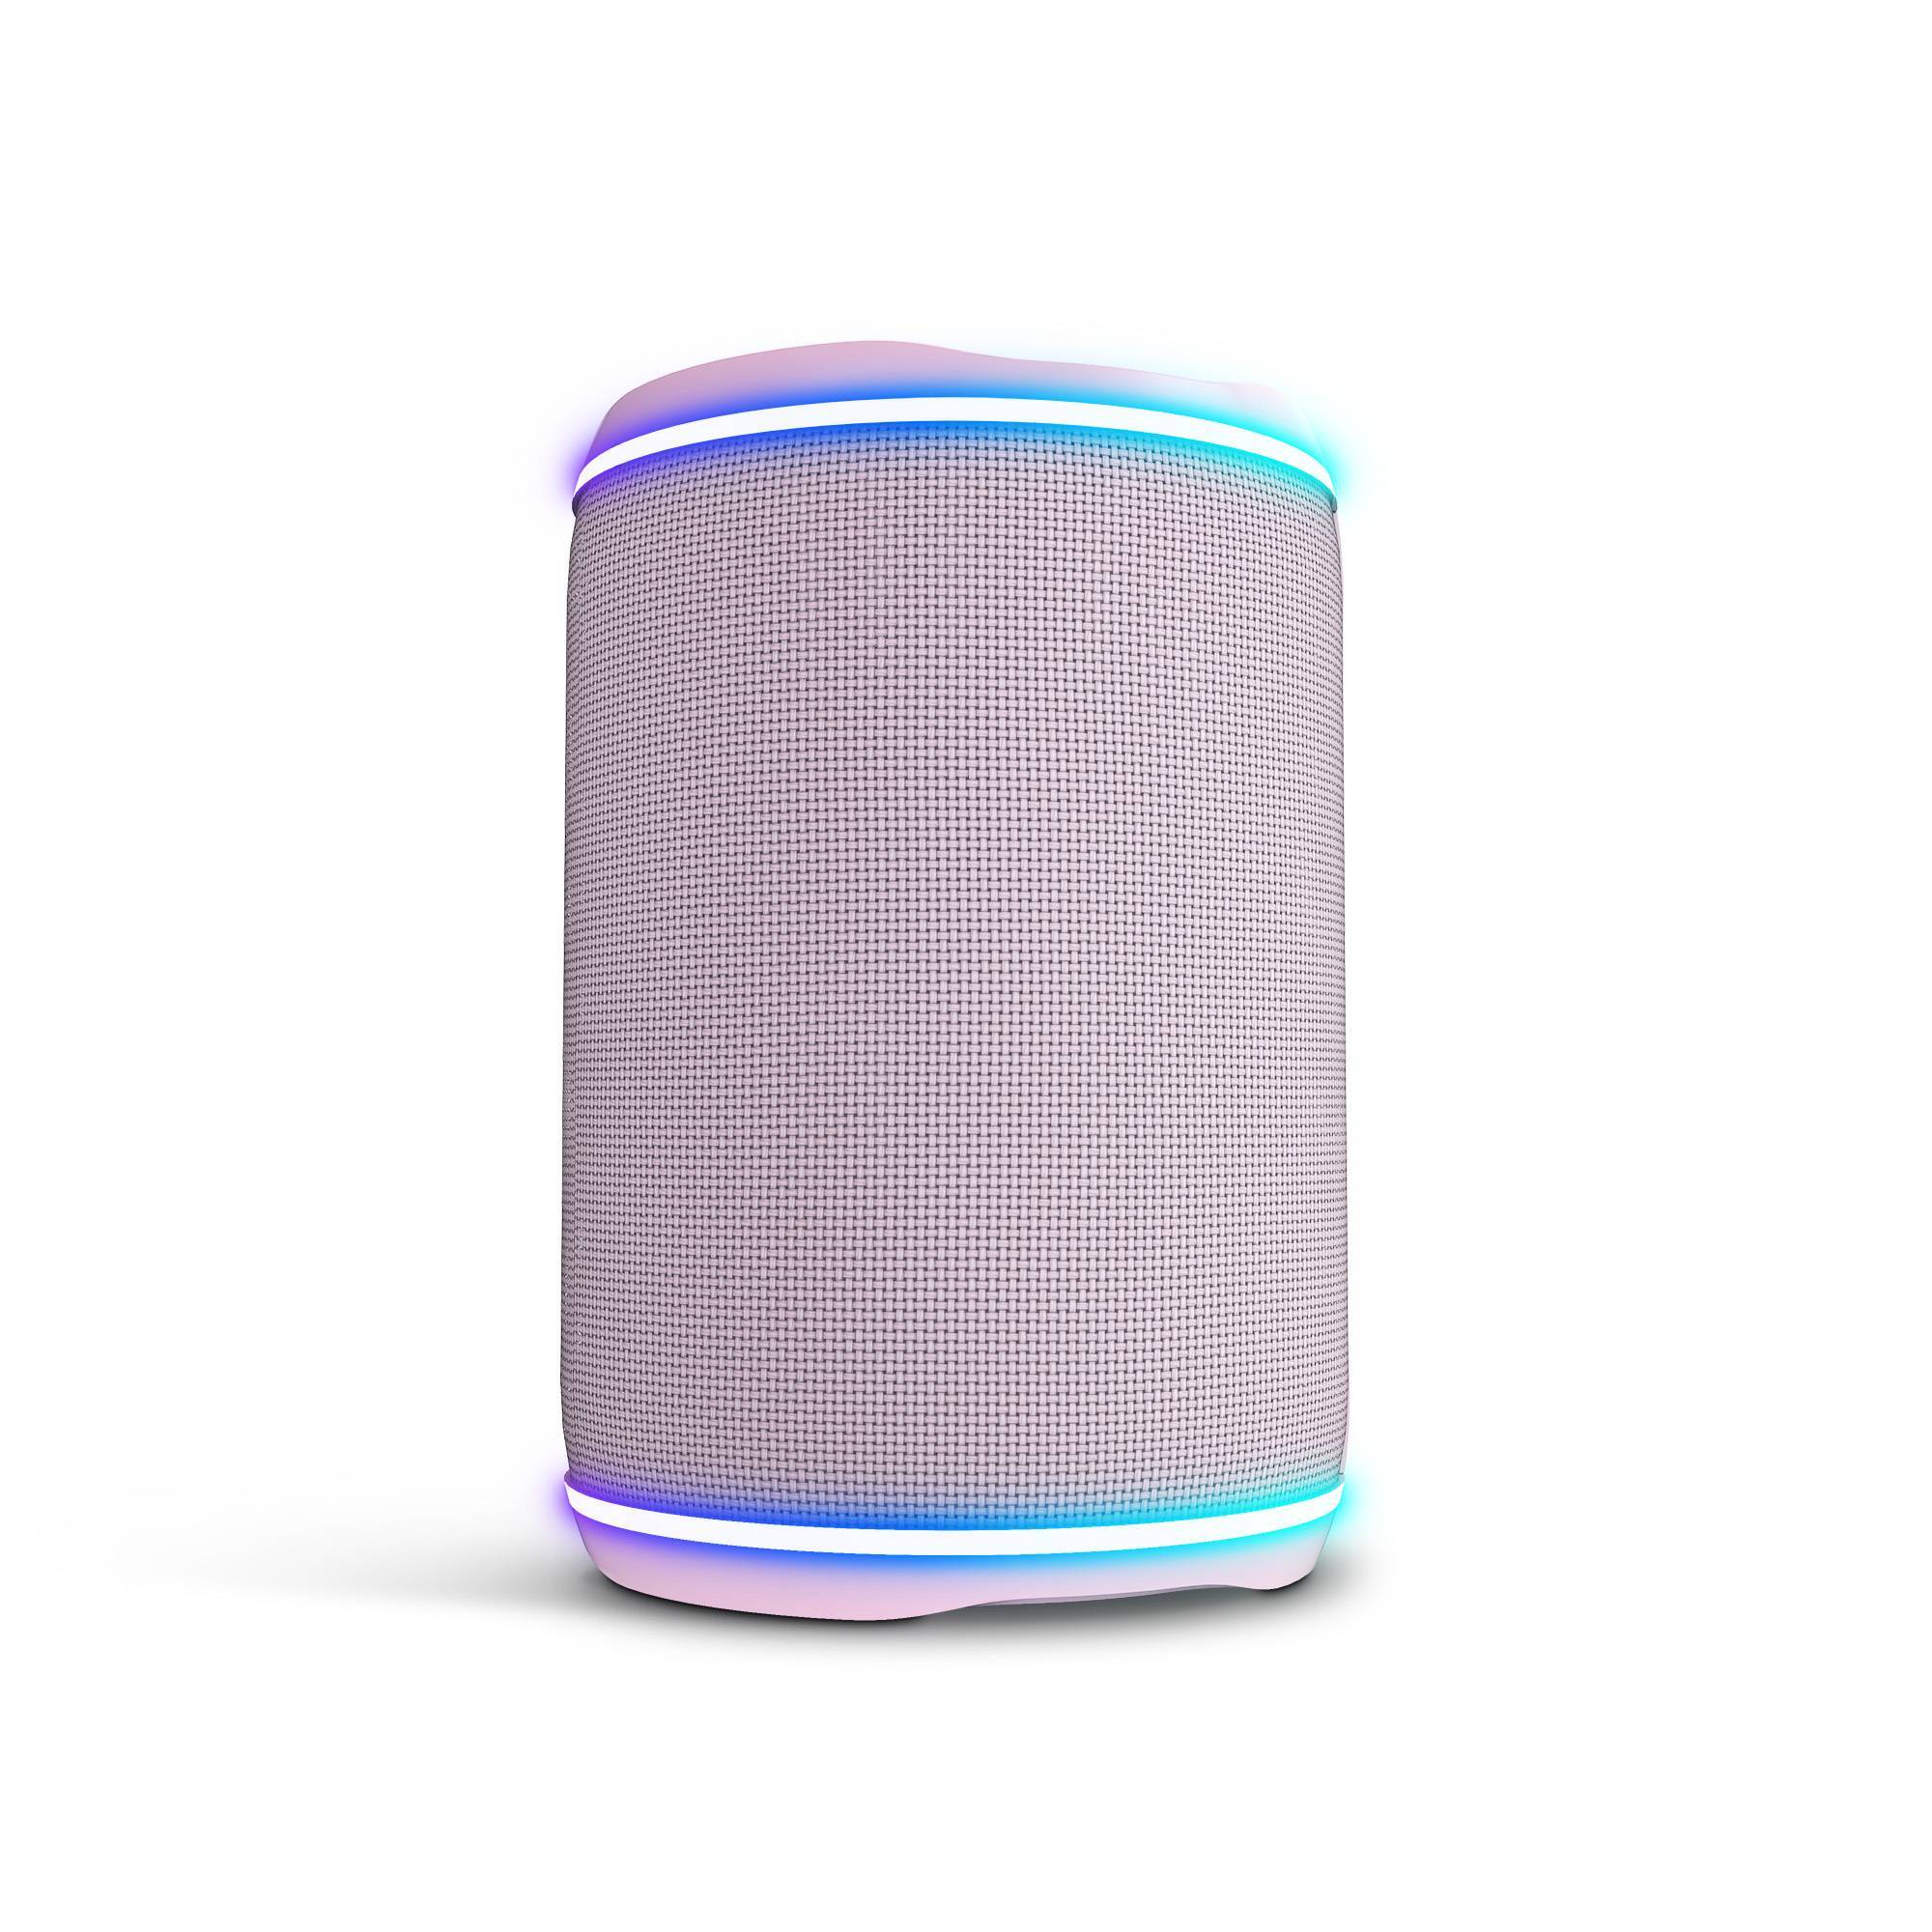 Wireless speaker featuring a range of RGB light sequences